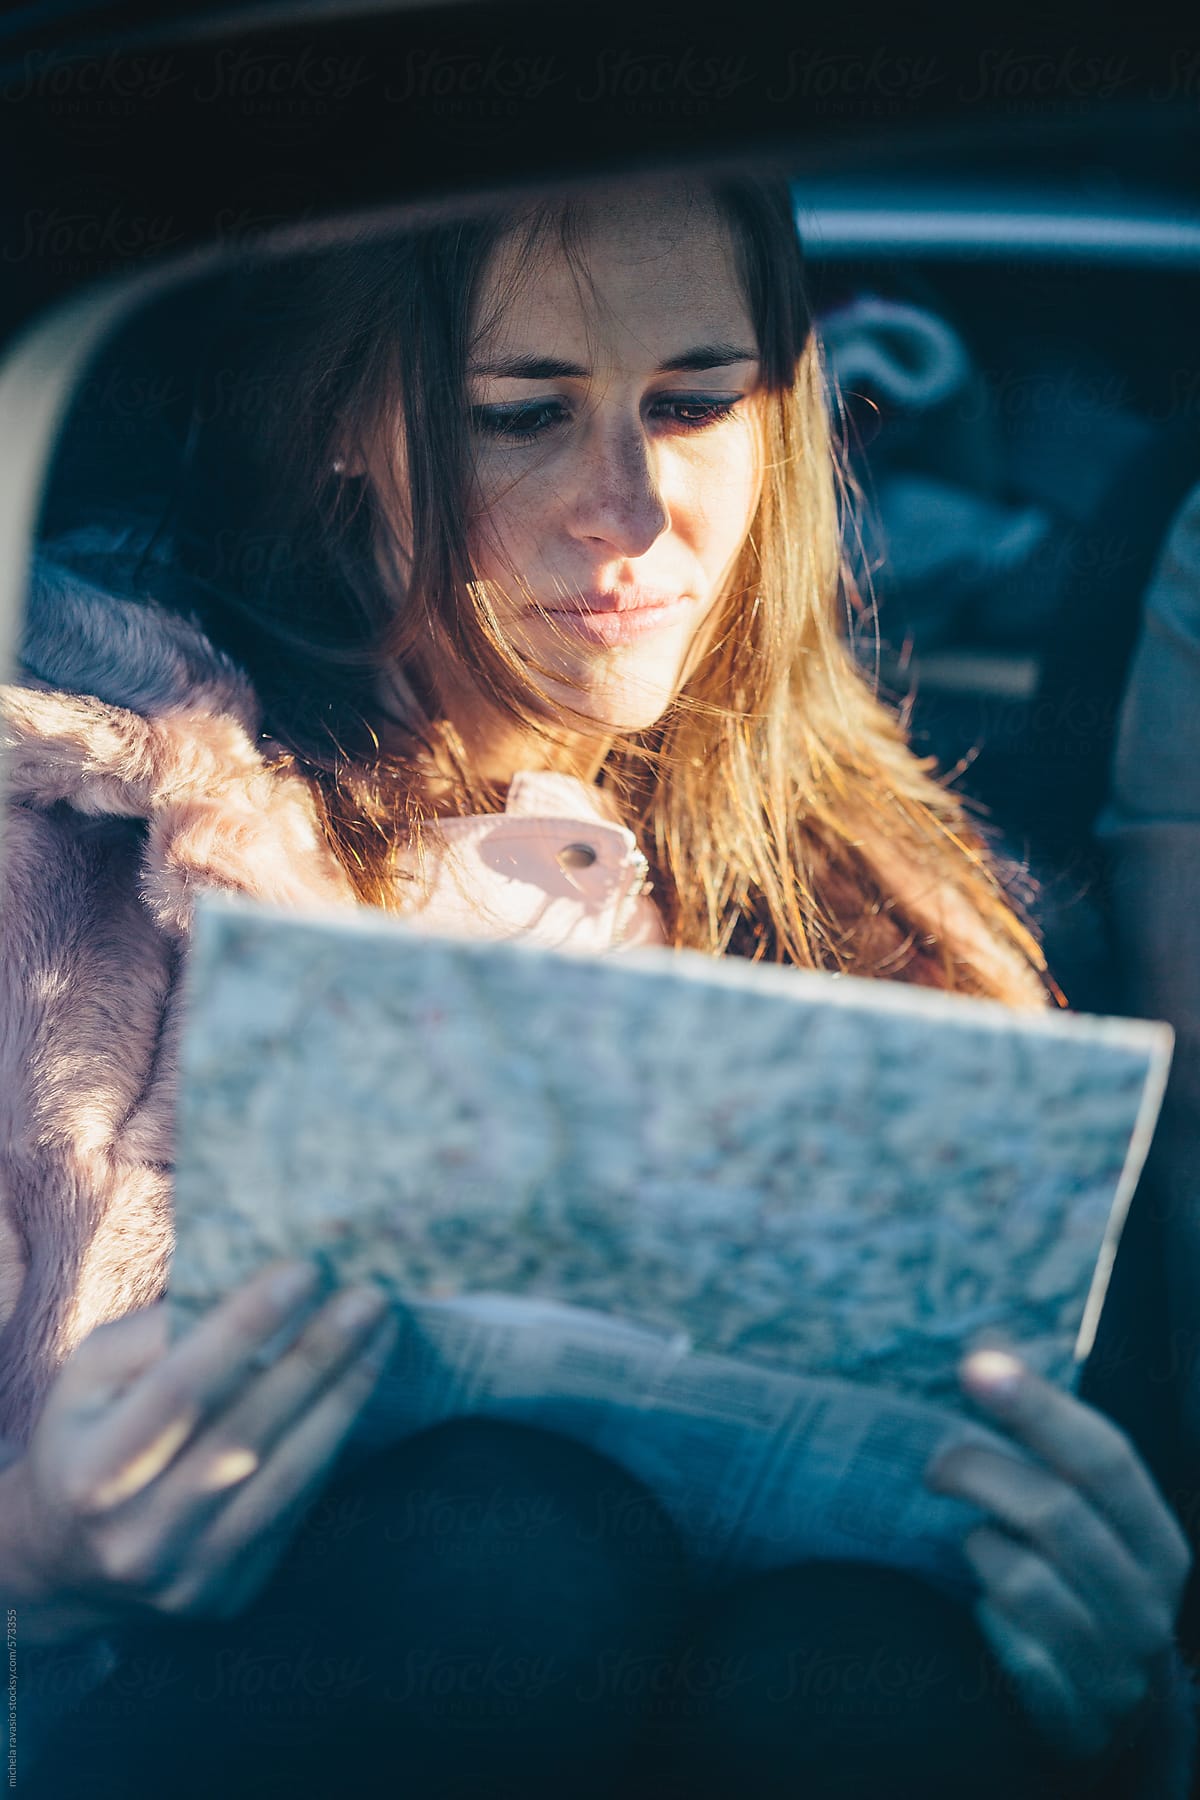 Woman sitting in car checks the road map